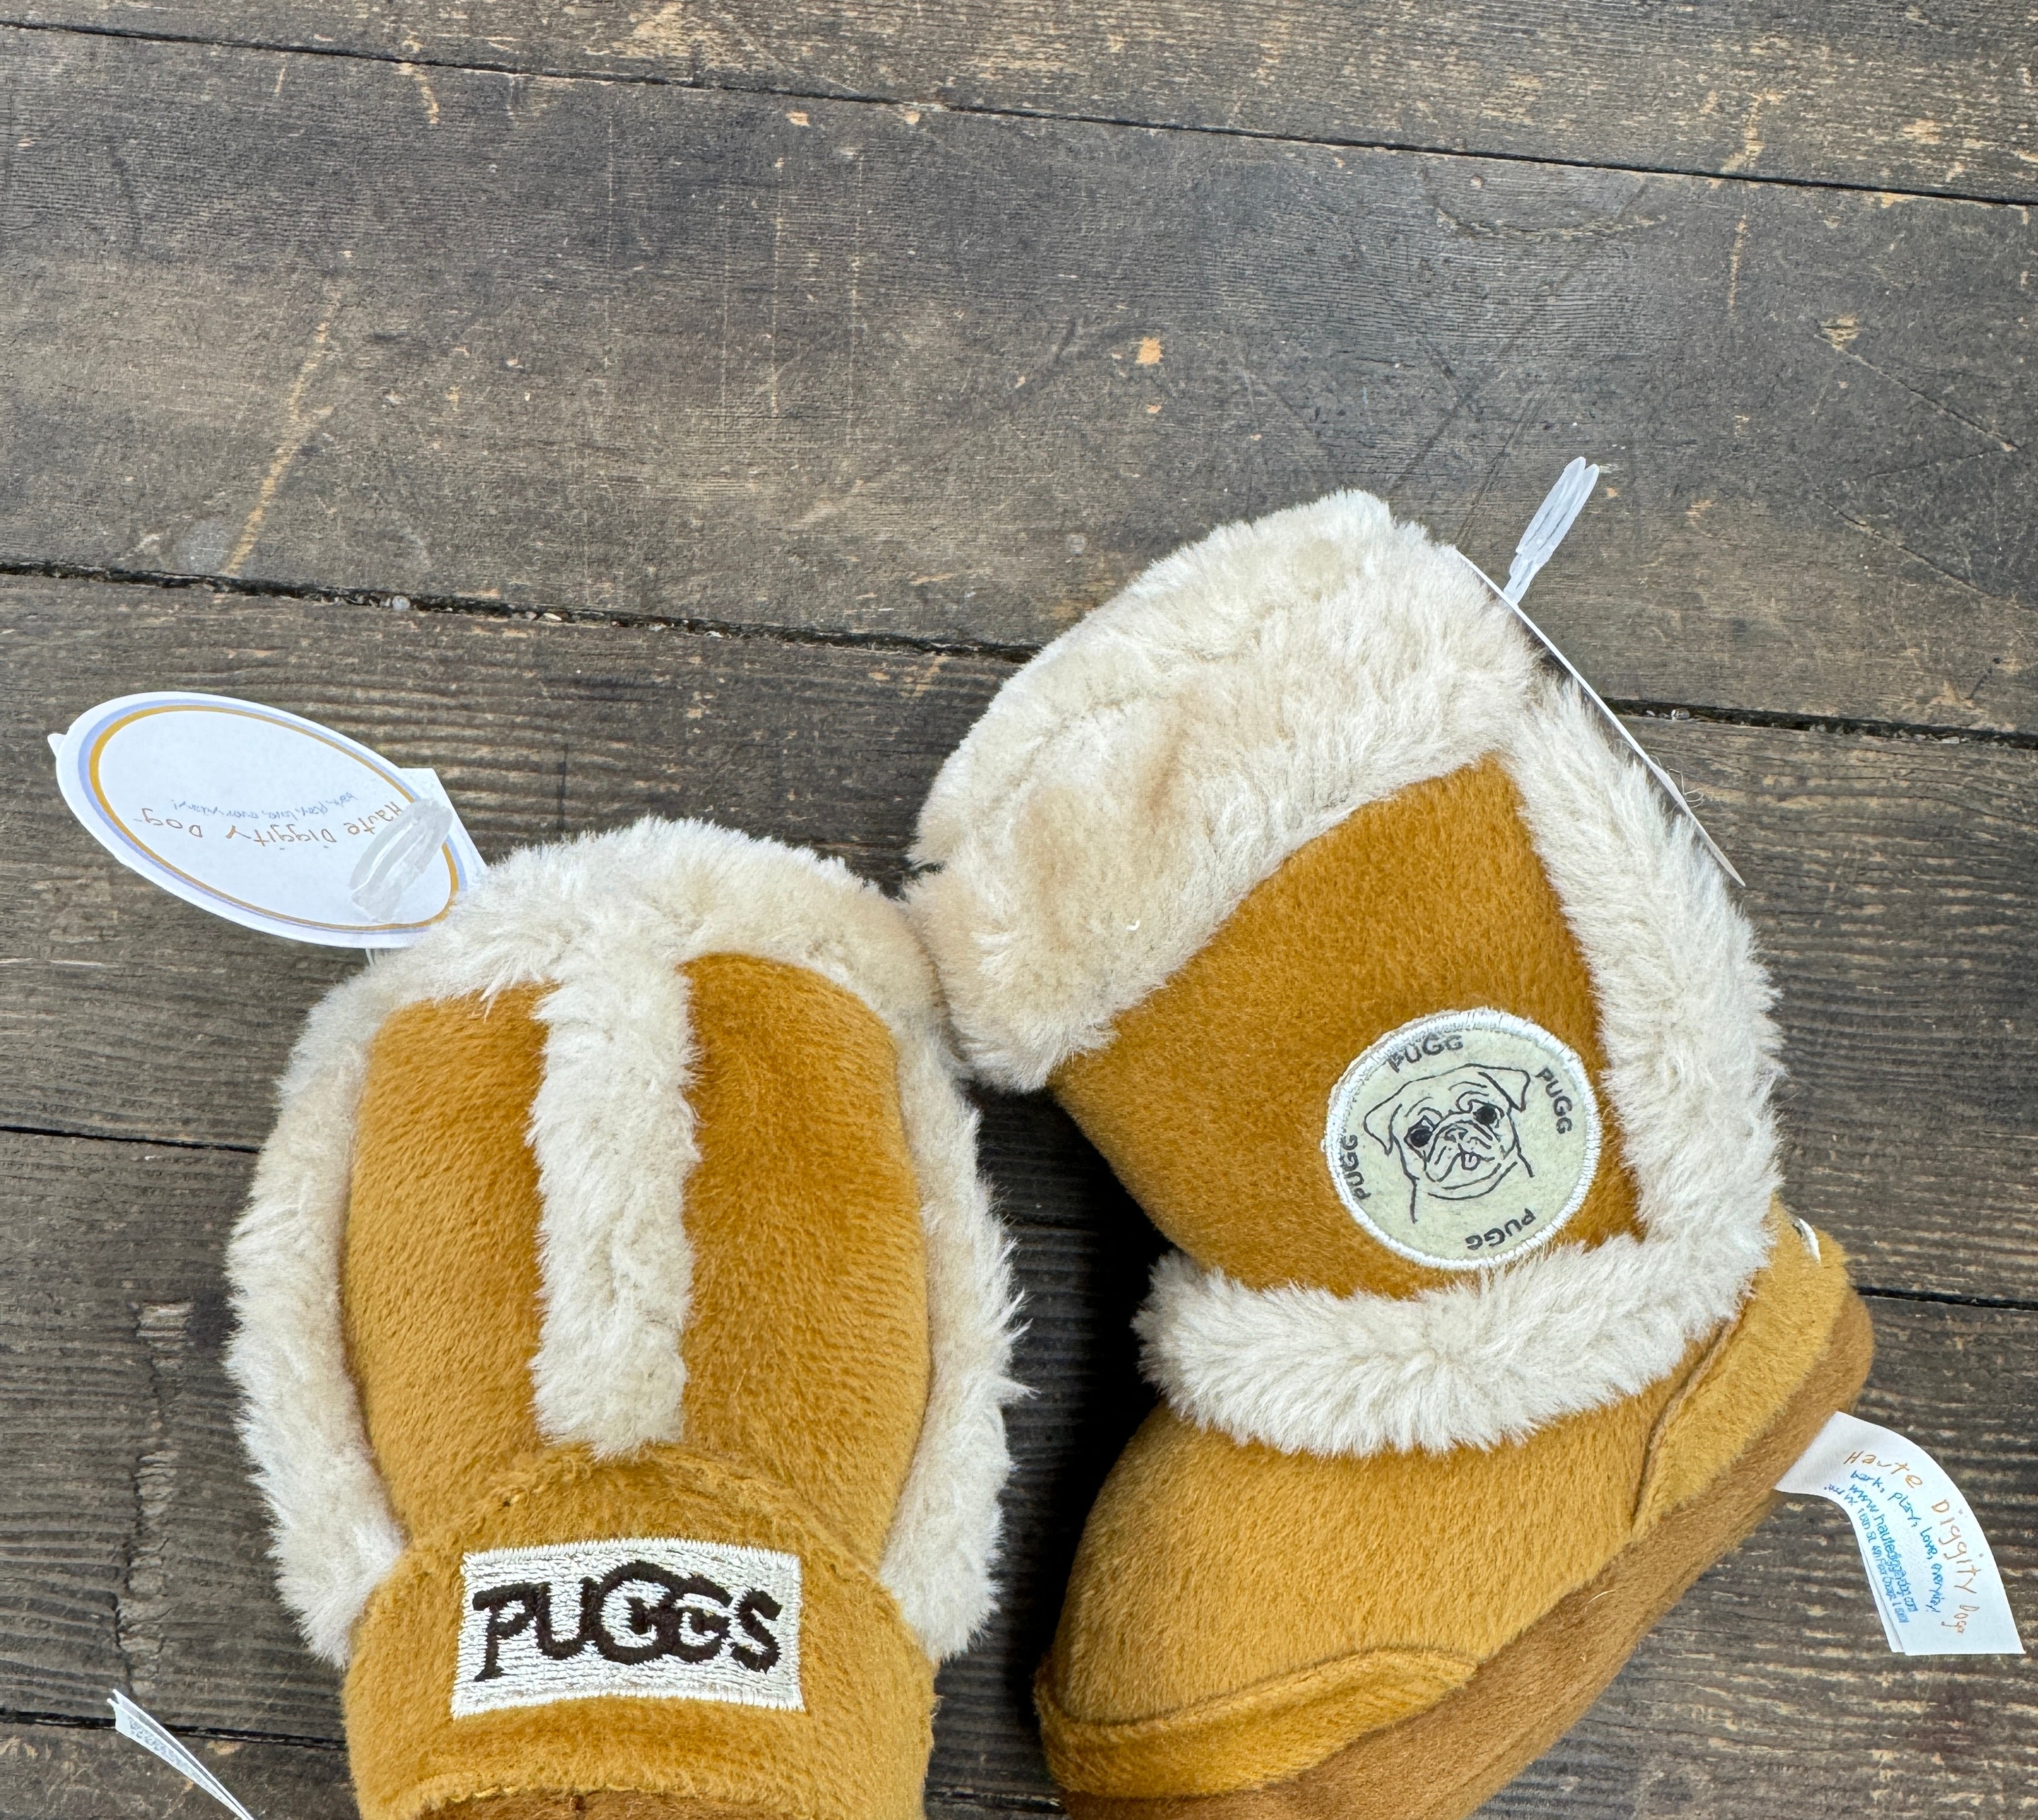 Pugg Boot Toy Squeaker Dog Toy-Dog Toys-haute diggity-The Silo Boutique, Women's Fashion Boutique Located in Warren and Grand Forks North Dakota